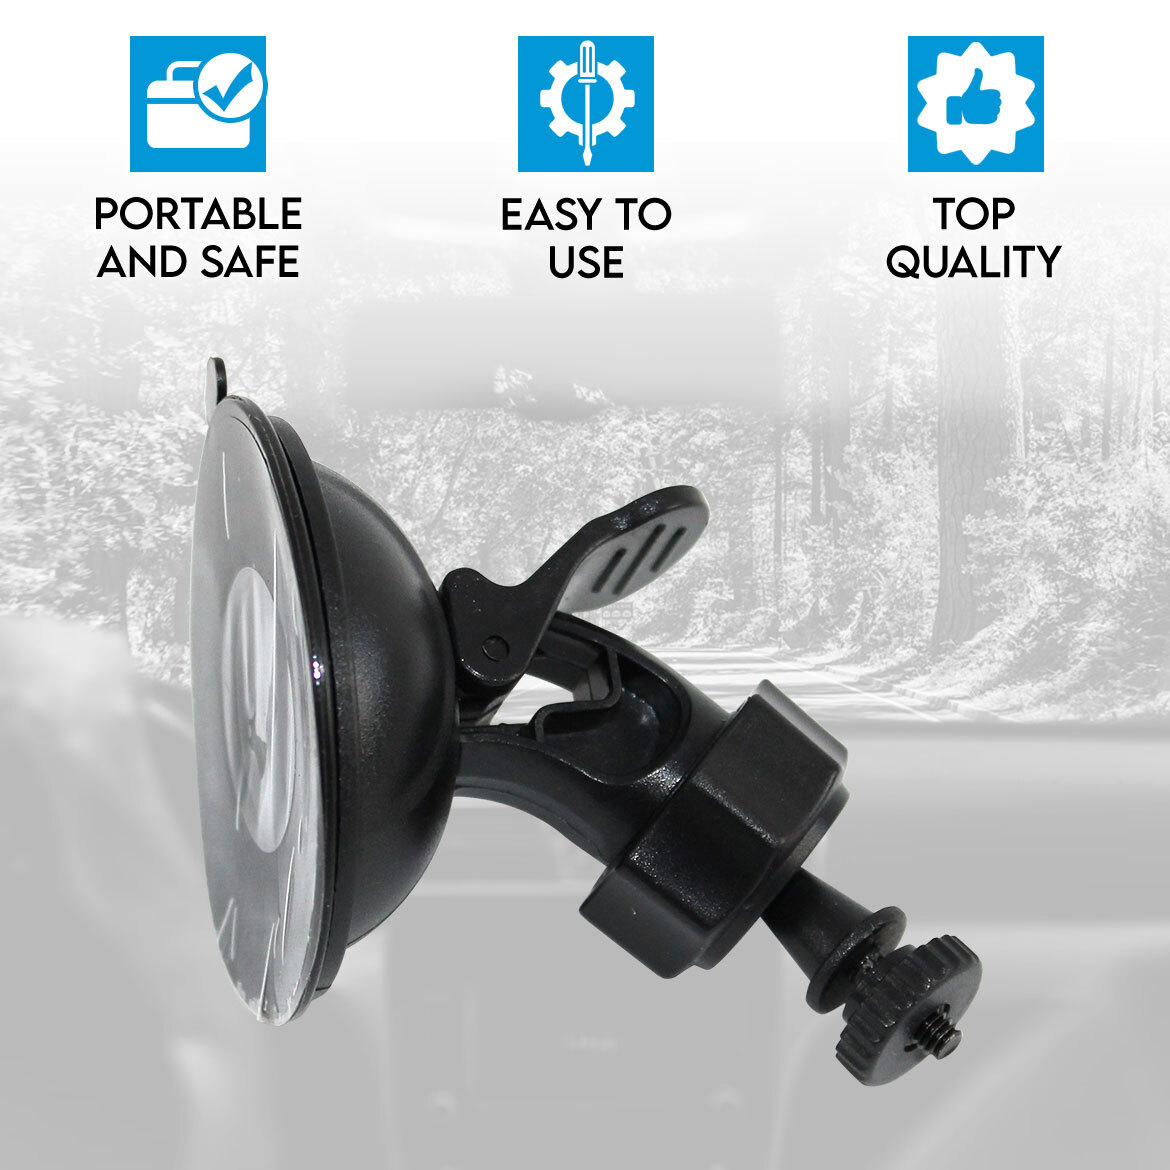 Eaglecam Holder001 Dash Camera Suction Mount Cup Holder Vehicle Video Recorder Windshield Accessory Box 